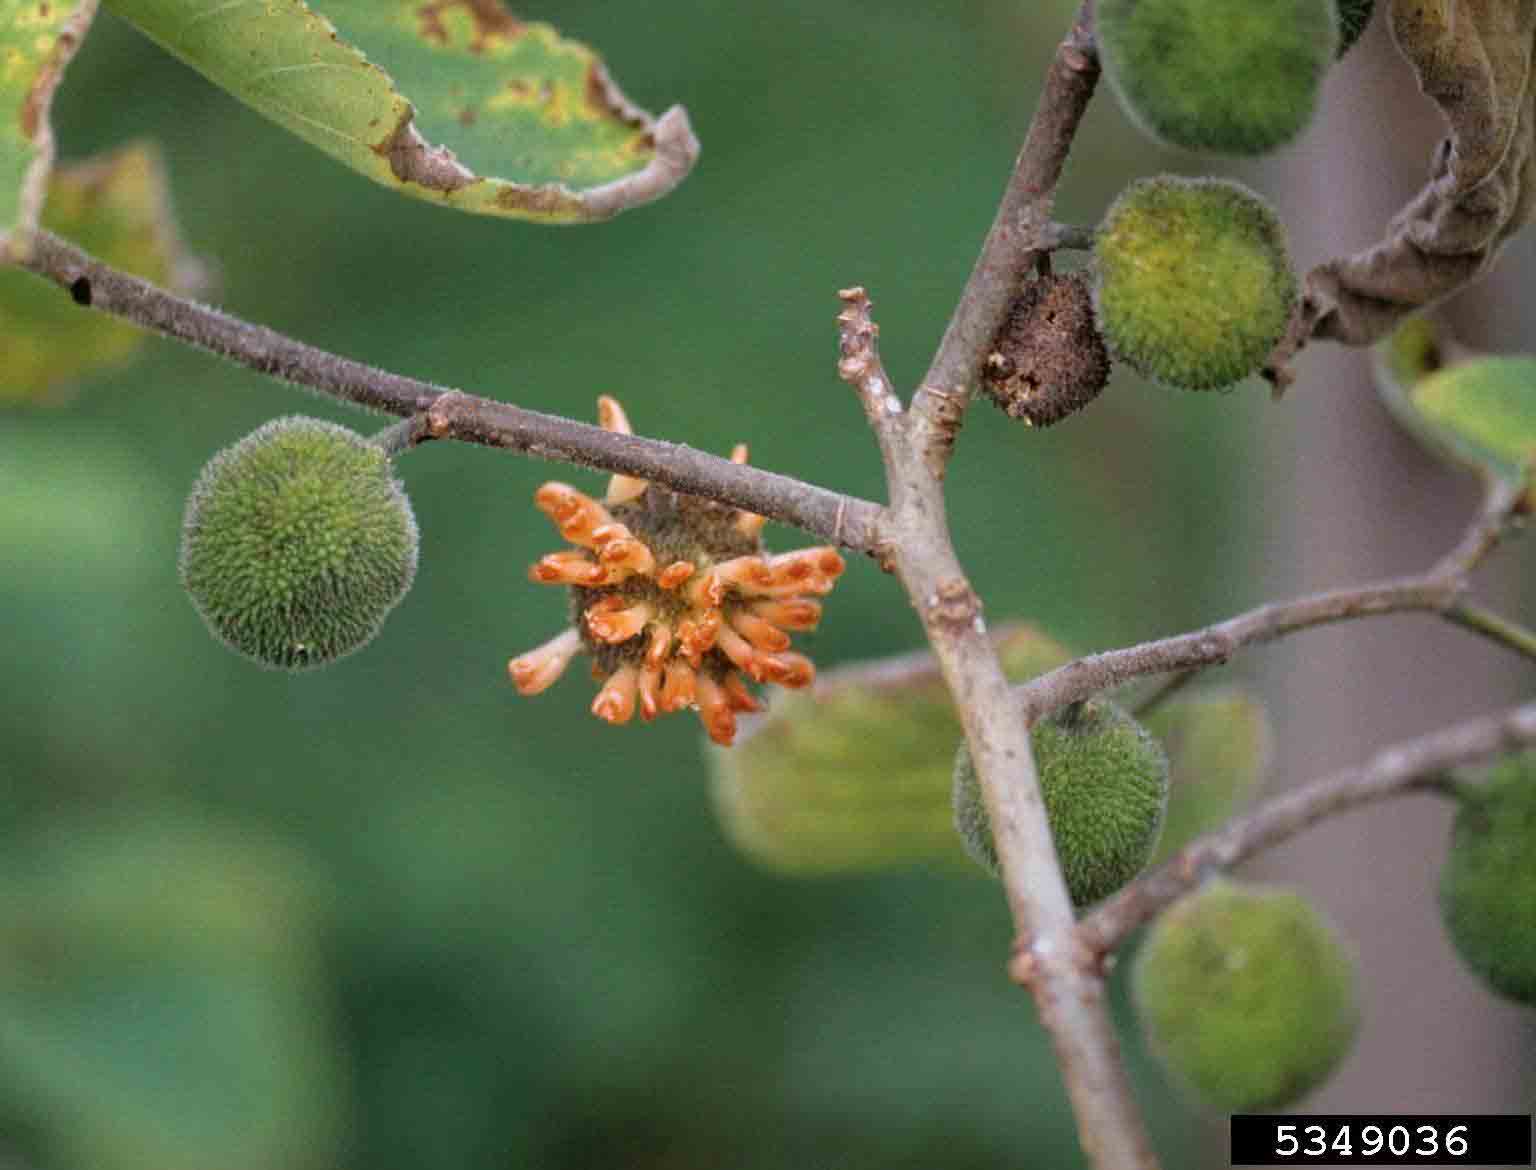 Paper mulberry flowers and fruits